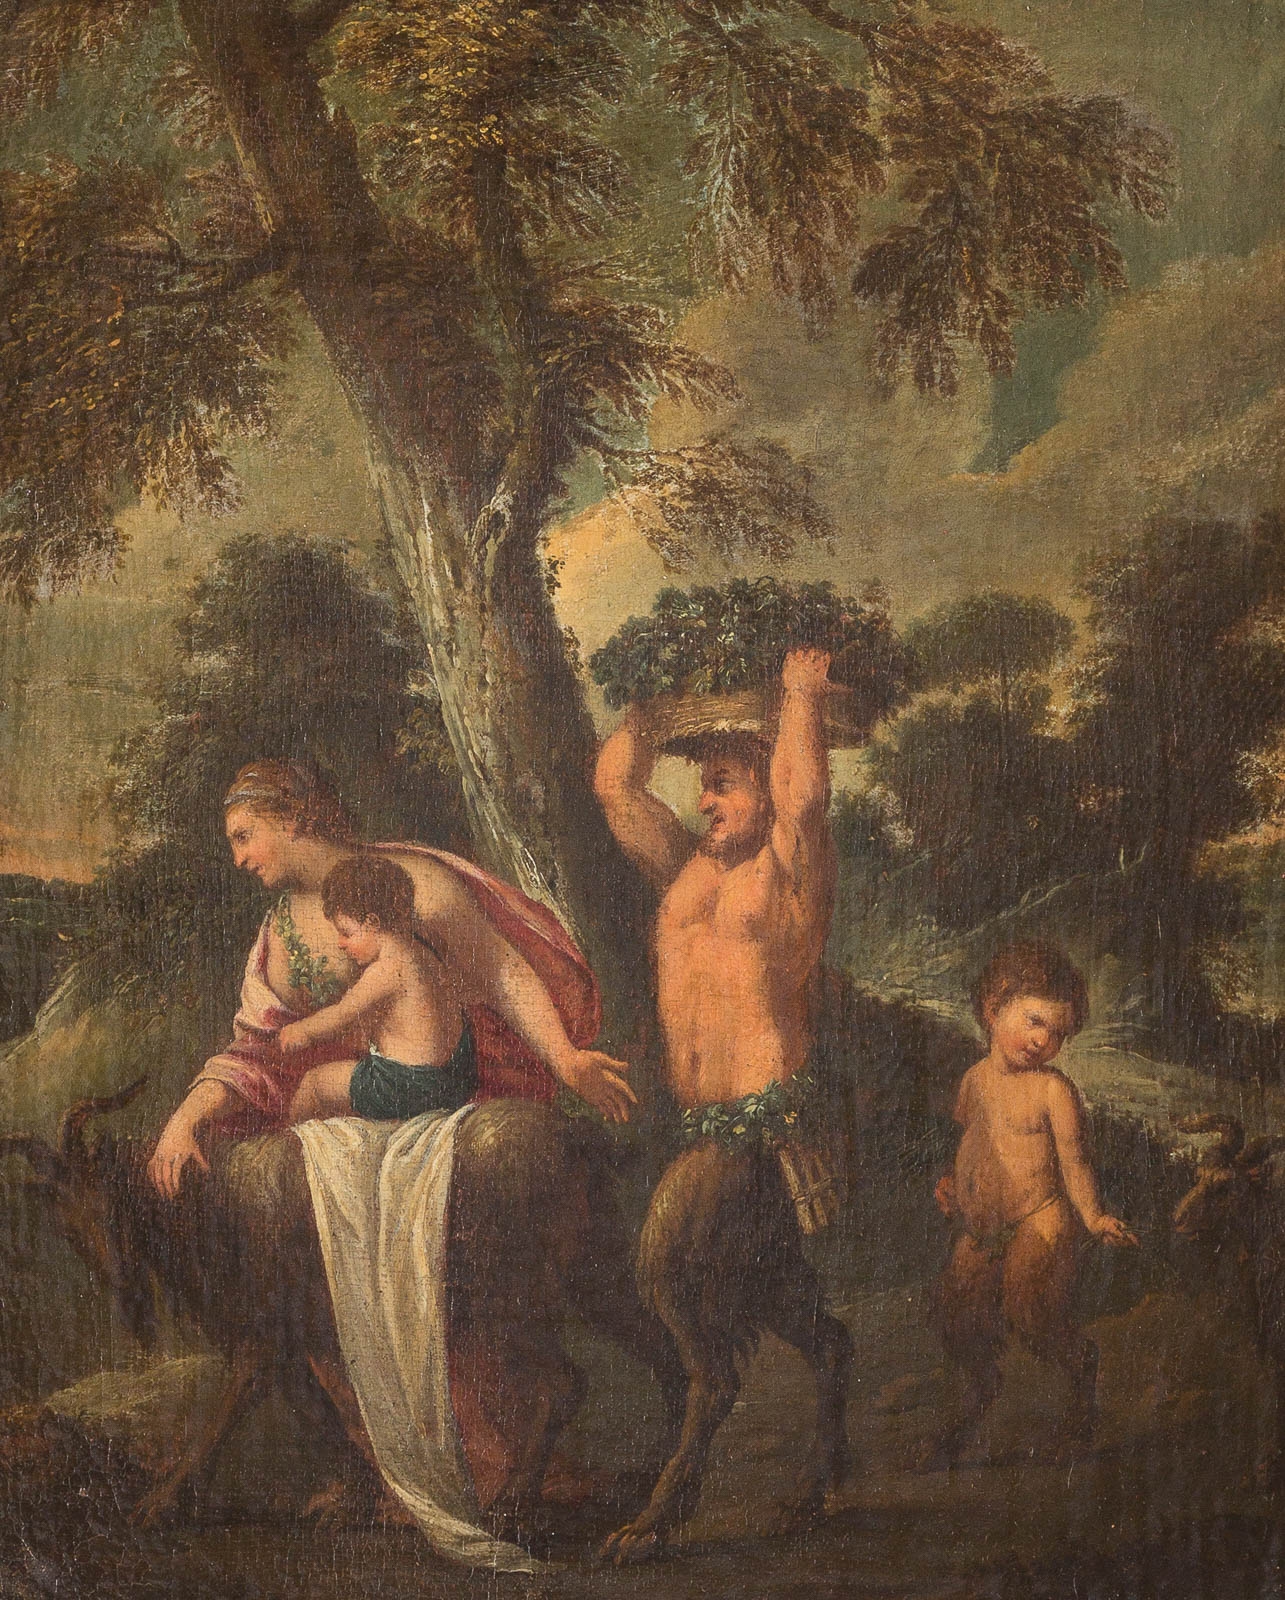 Venus and Cupid with Panfamily and Goats by Nicolas Poussin